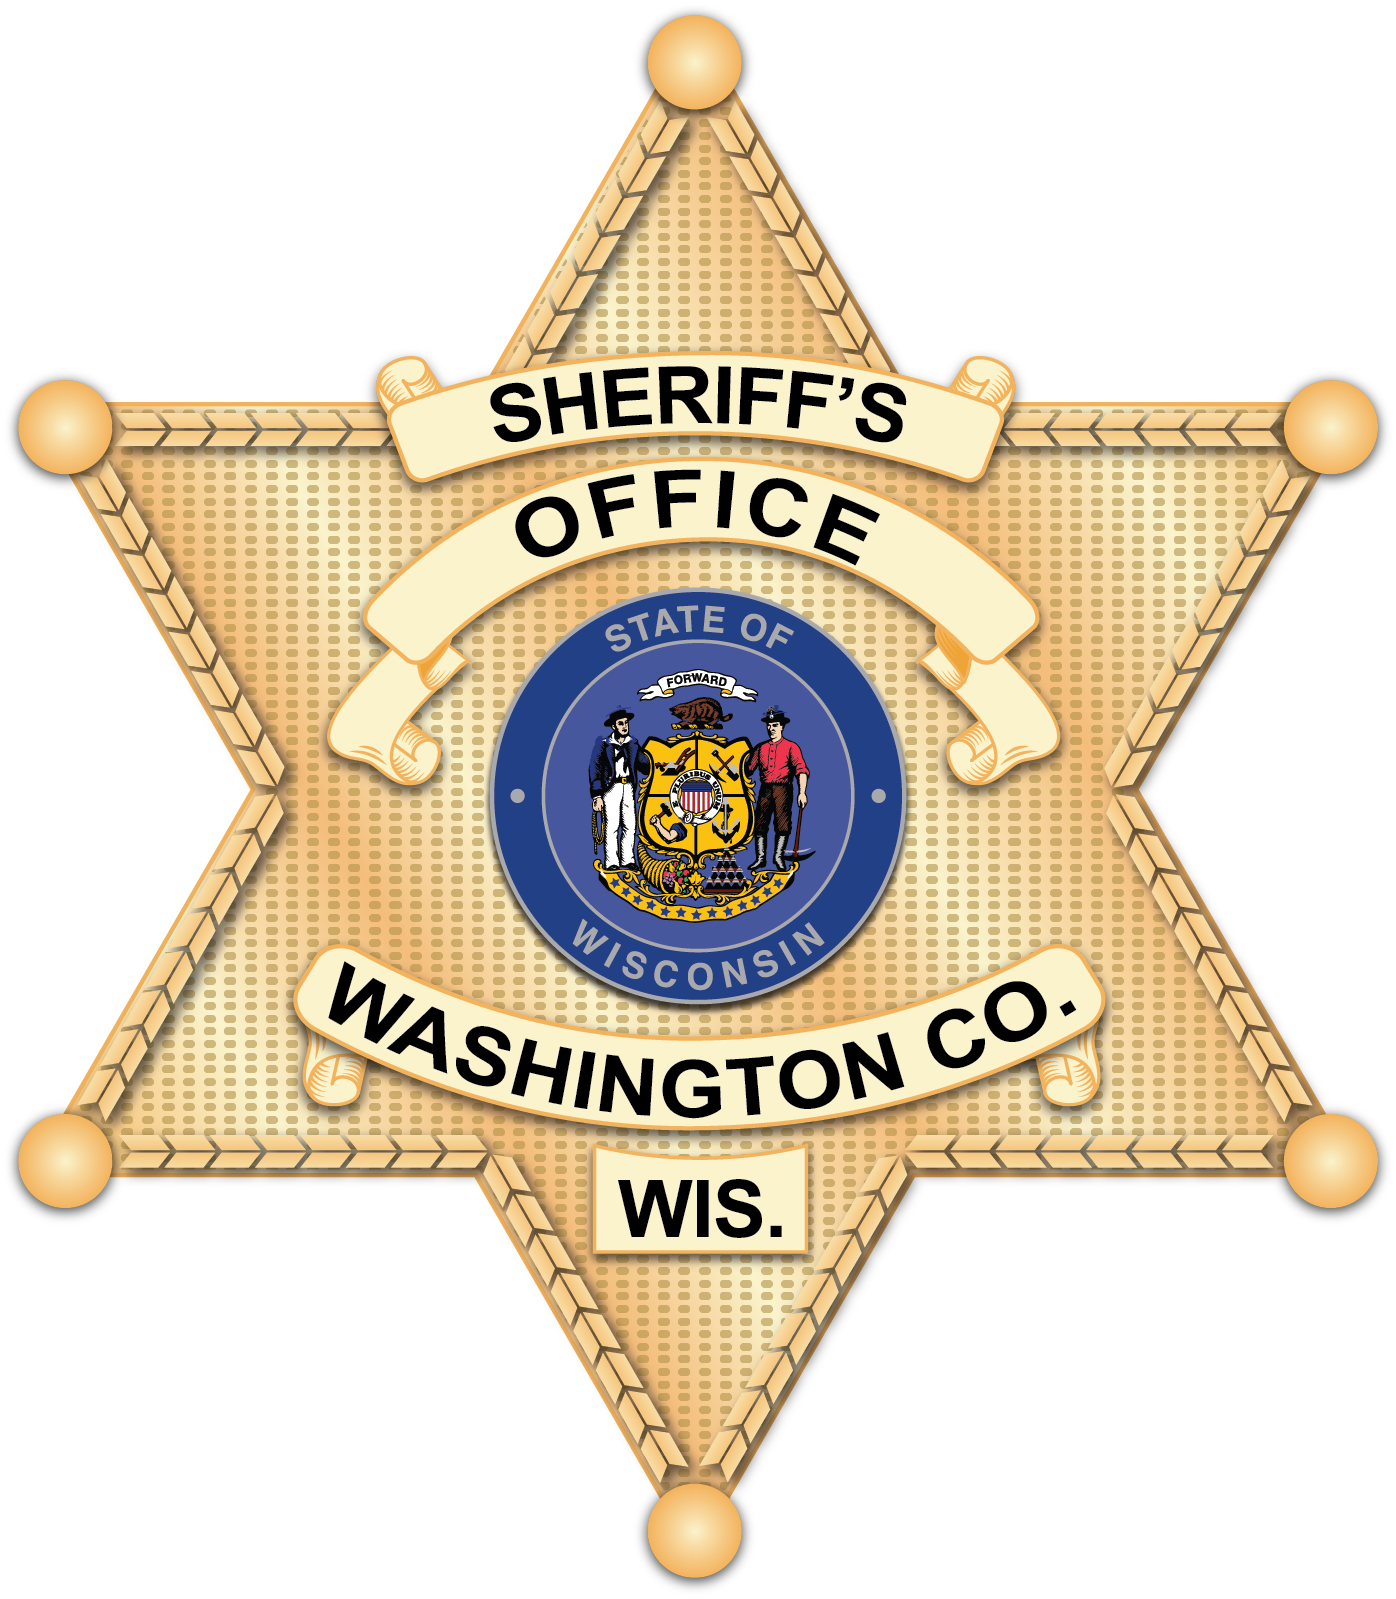 Official bade of the Washington County Sheriff's Office in Wisconsin